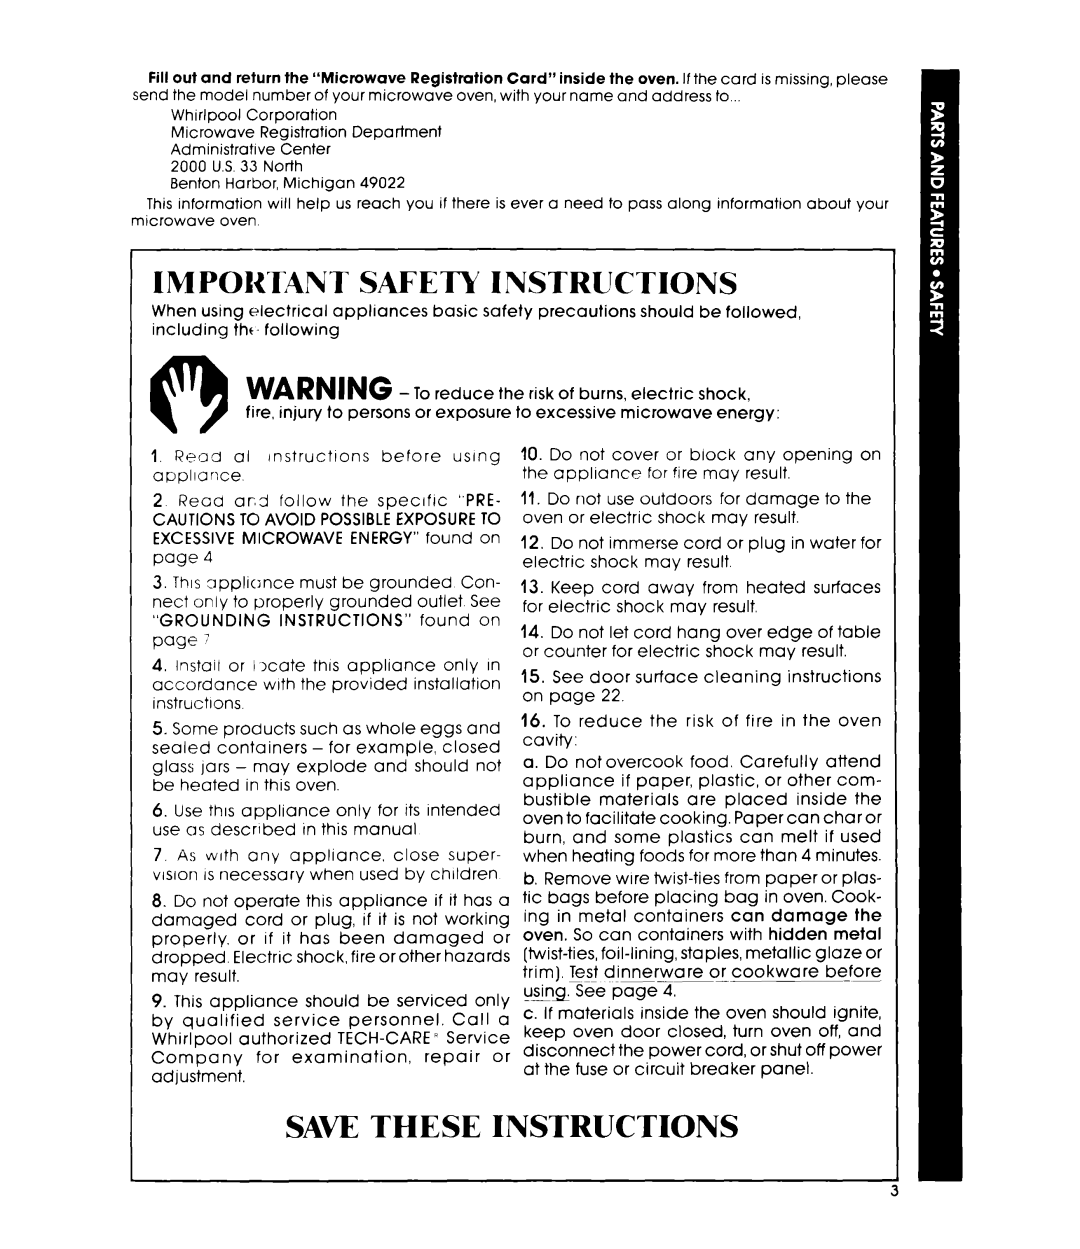 Whirlpool MW3500XM manual IMPORTt4NT SAFETY INSTRUCTIONS, Saw These Instructions 